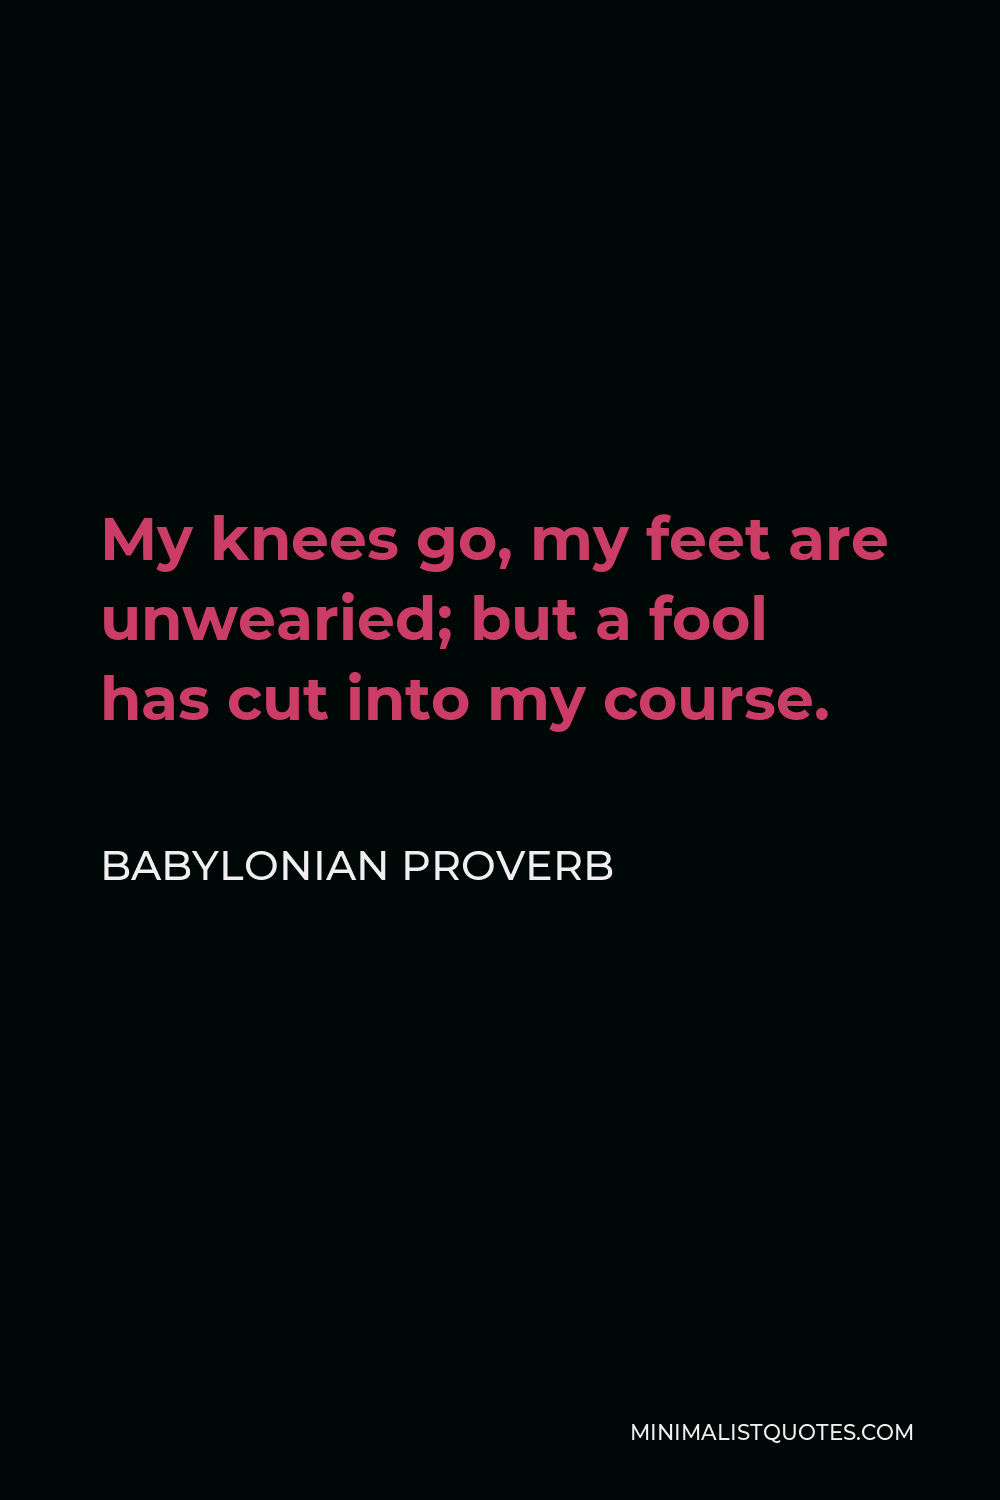 Babylonian Proverb Quote - My knees go, my feet are unwearied; but a fool has cut into my course.